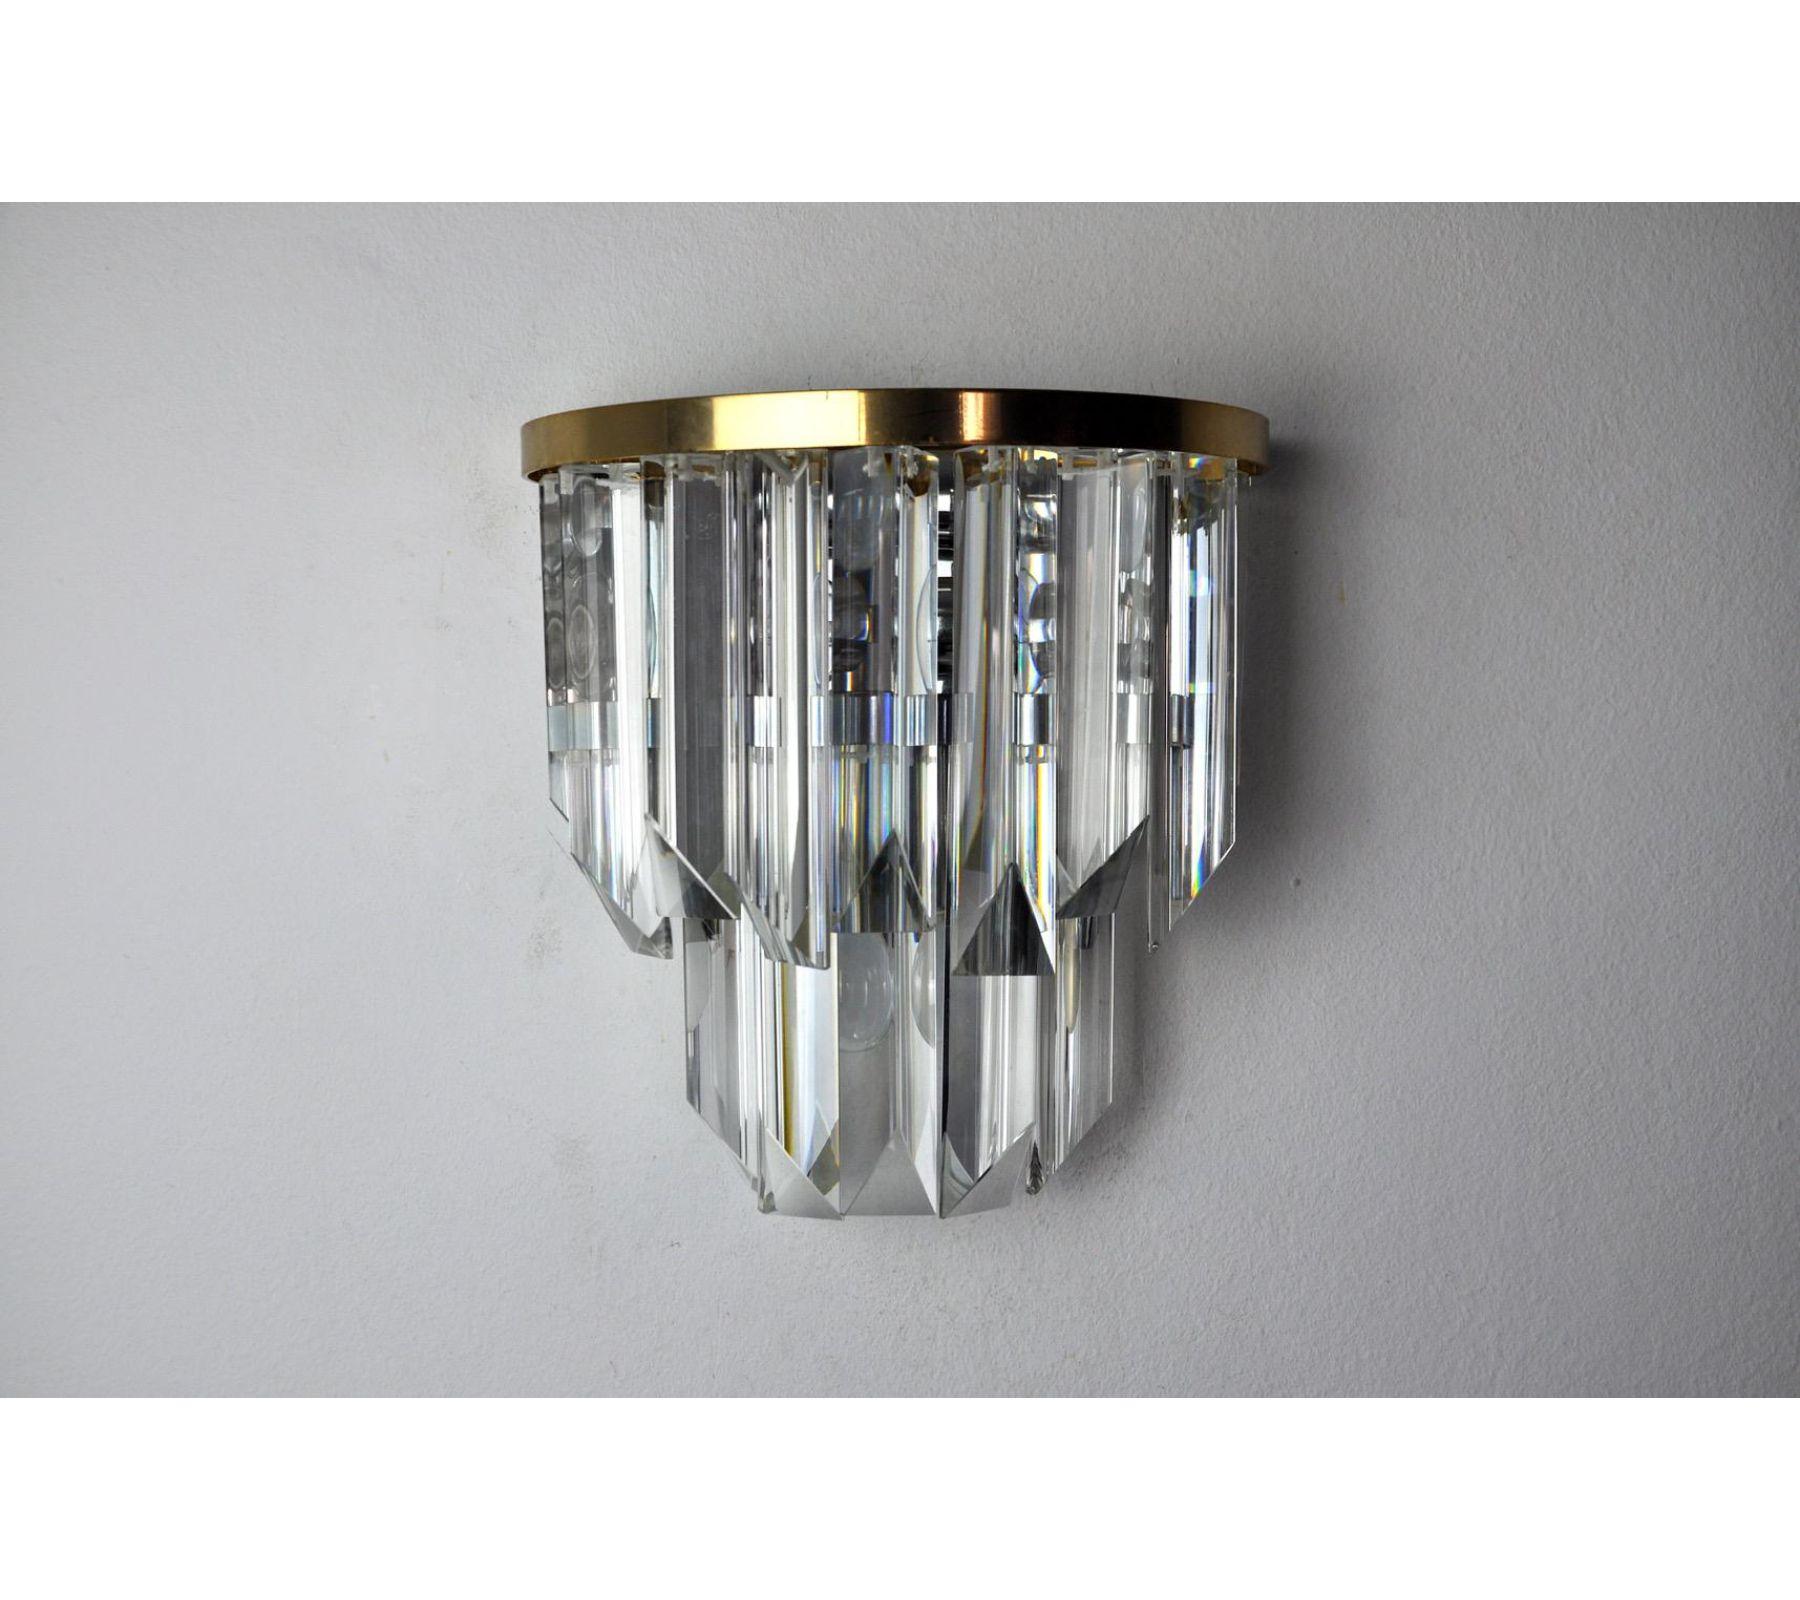 1970s Venini Wall Lamp, Italy For Sale 1